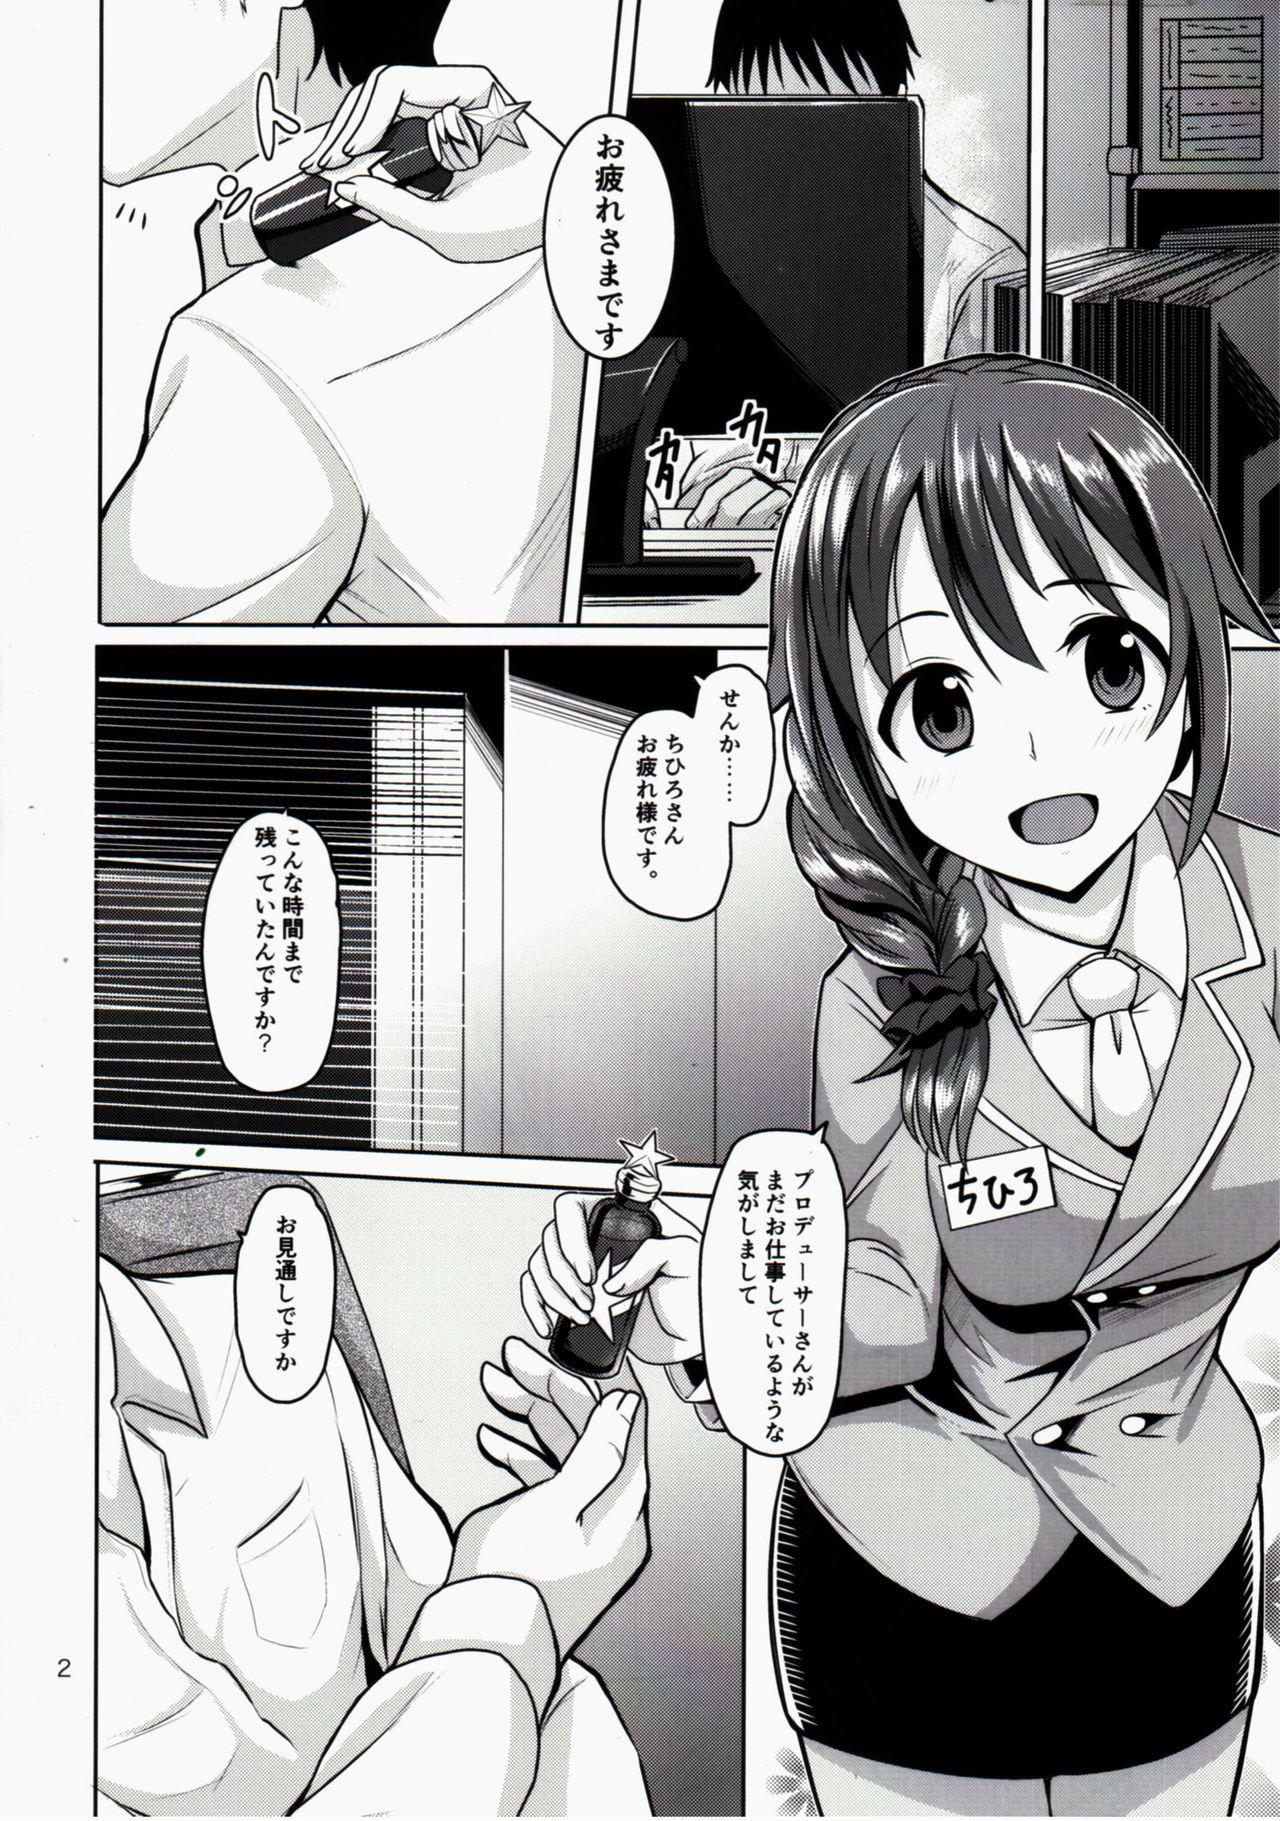 Load +1000 Drink - The idolmaster Buttfucking - Page 3